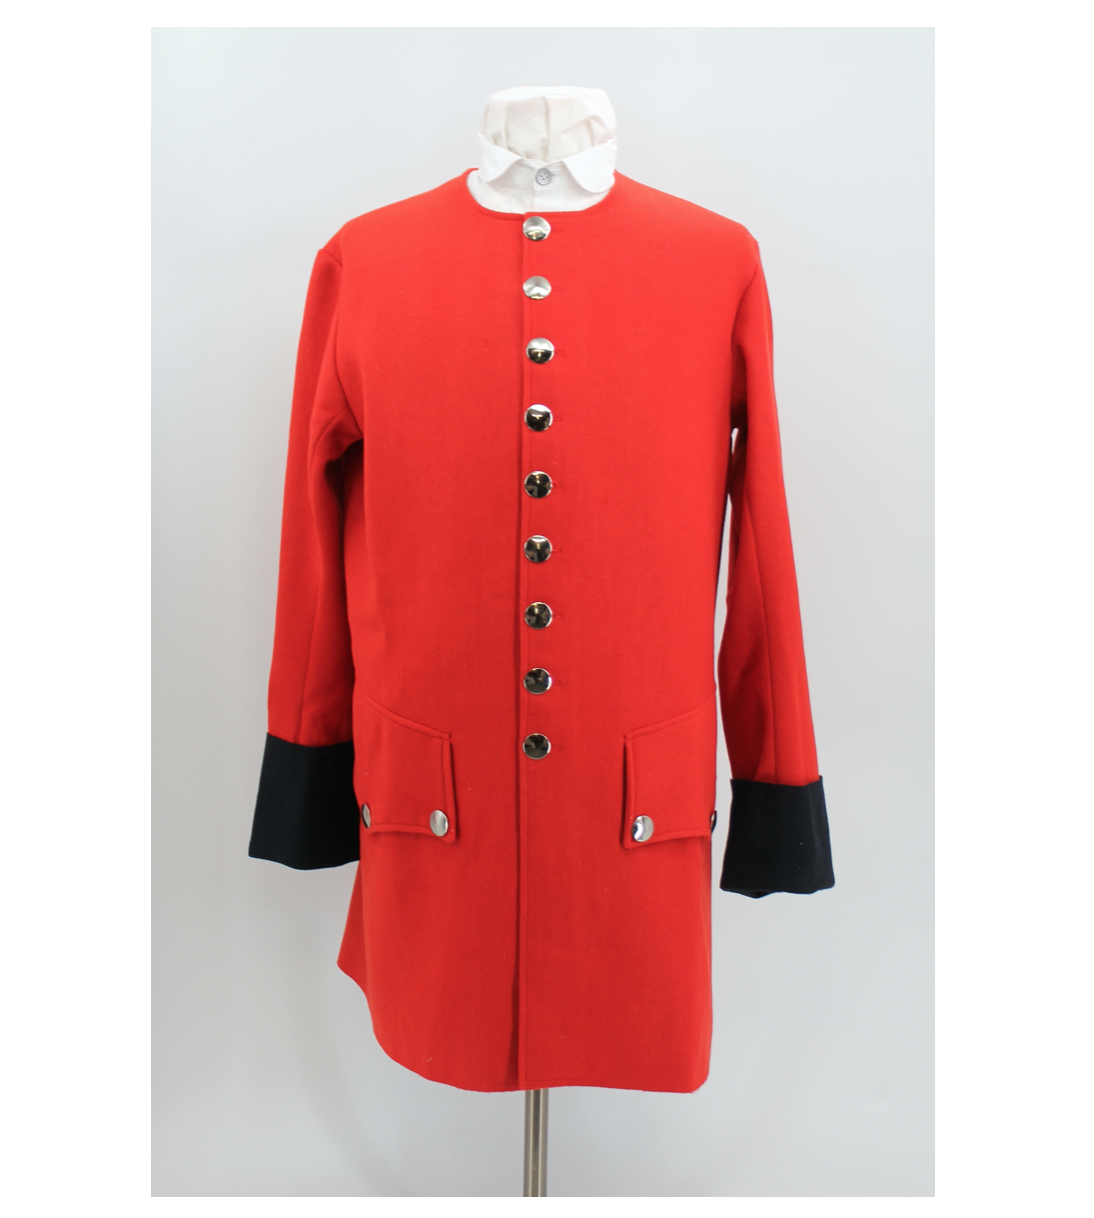 Red Wool Sleeved Waistcoat with Blue Cuffs - 1754 Virginia Regiment - Size 46 Без бренда